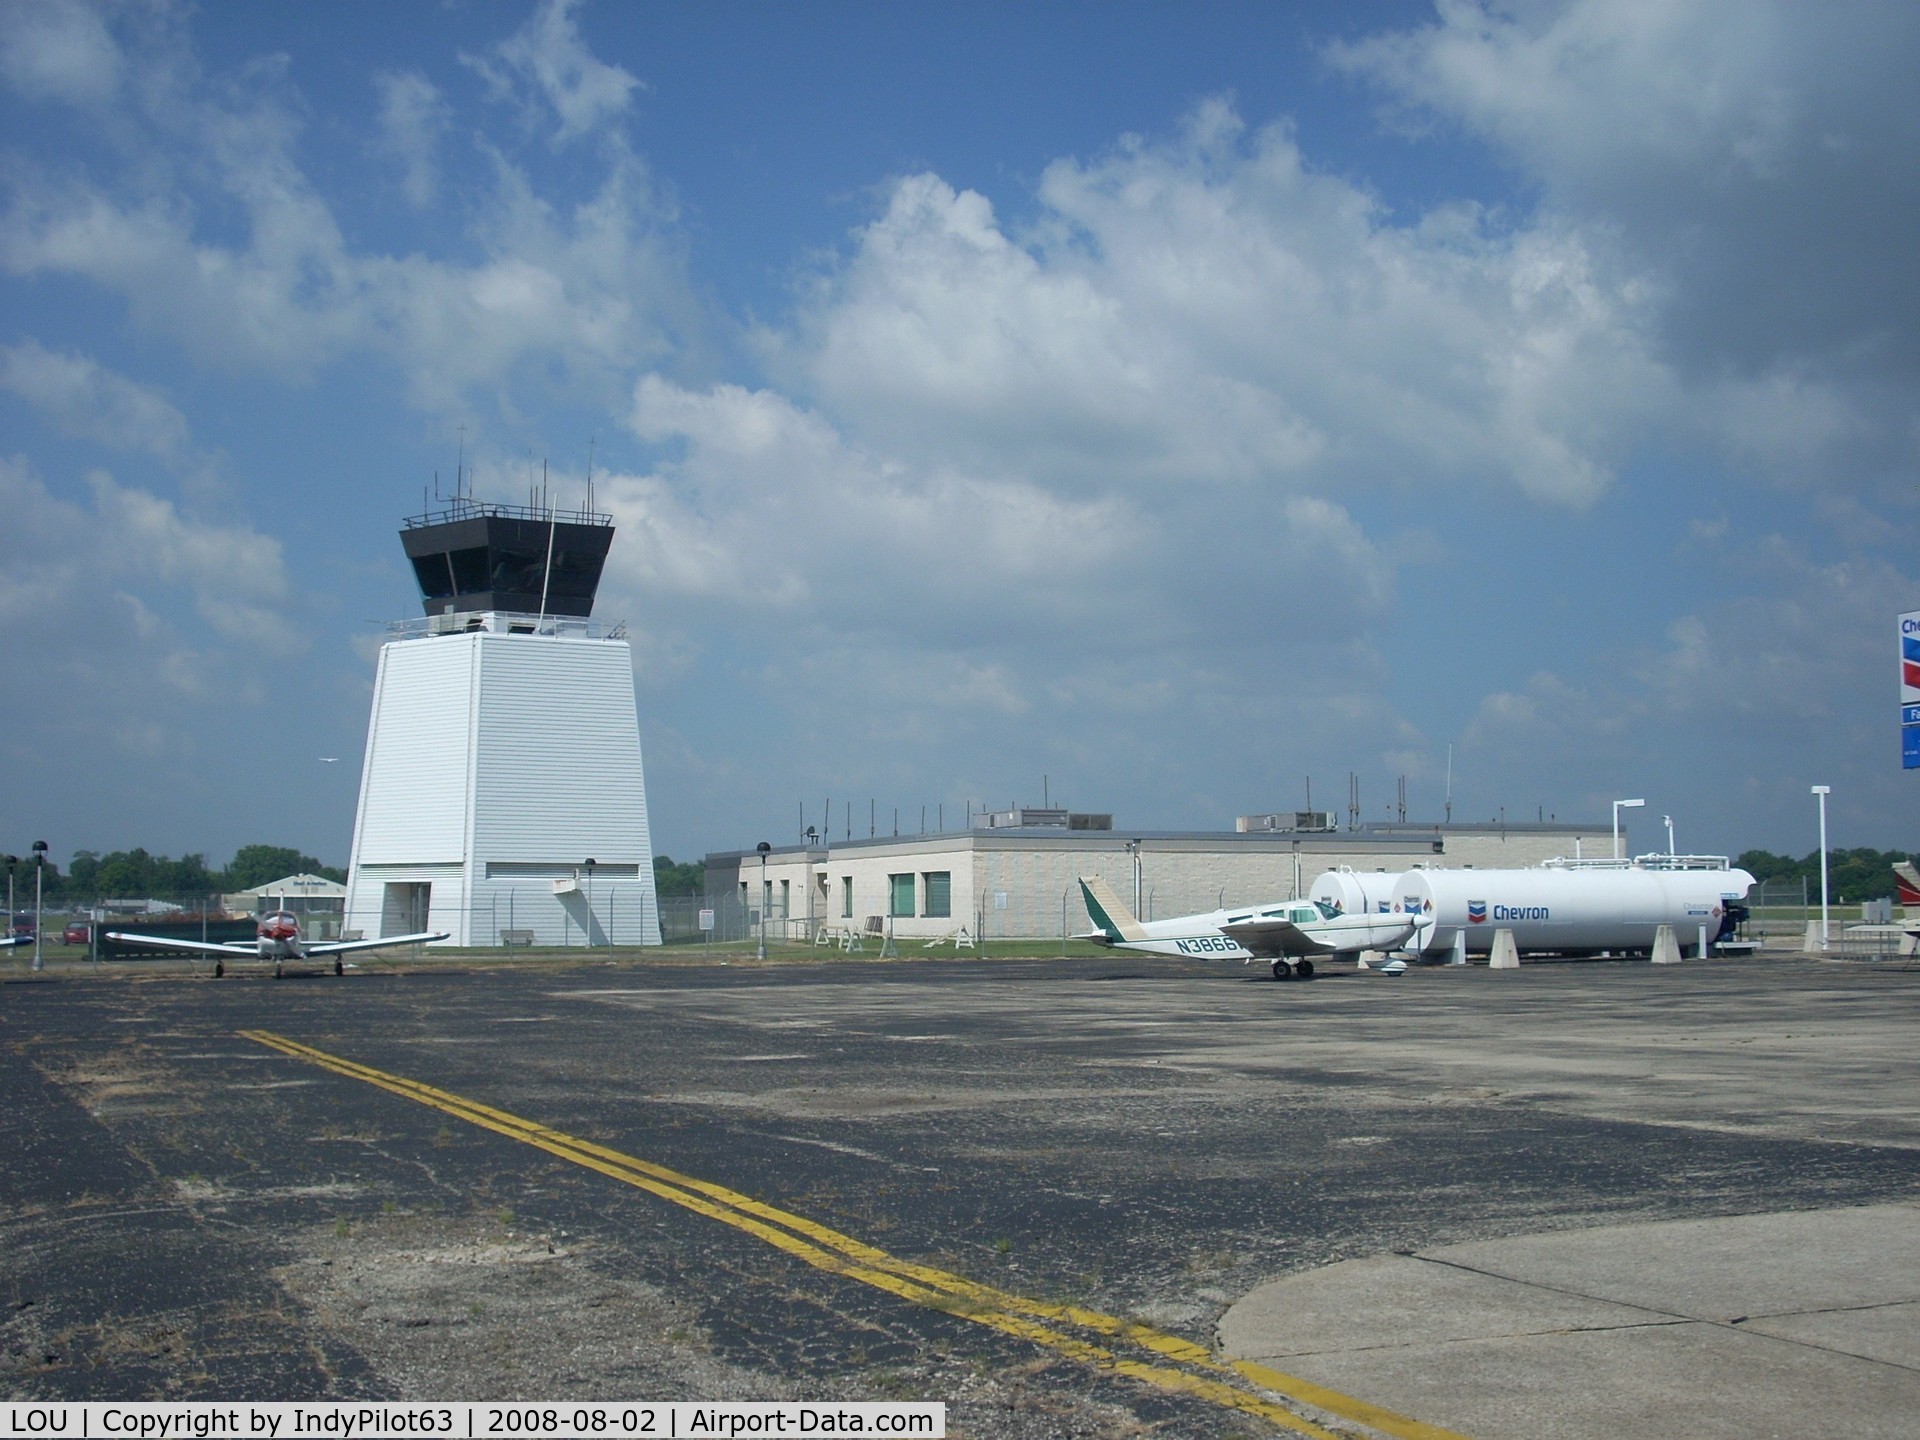 Bowman Field Airport (LOU) - White tower - almost identical in shape to Joe Foss Field in Sioux Falls, SD.